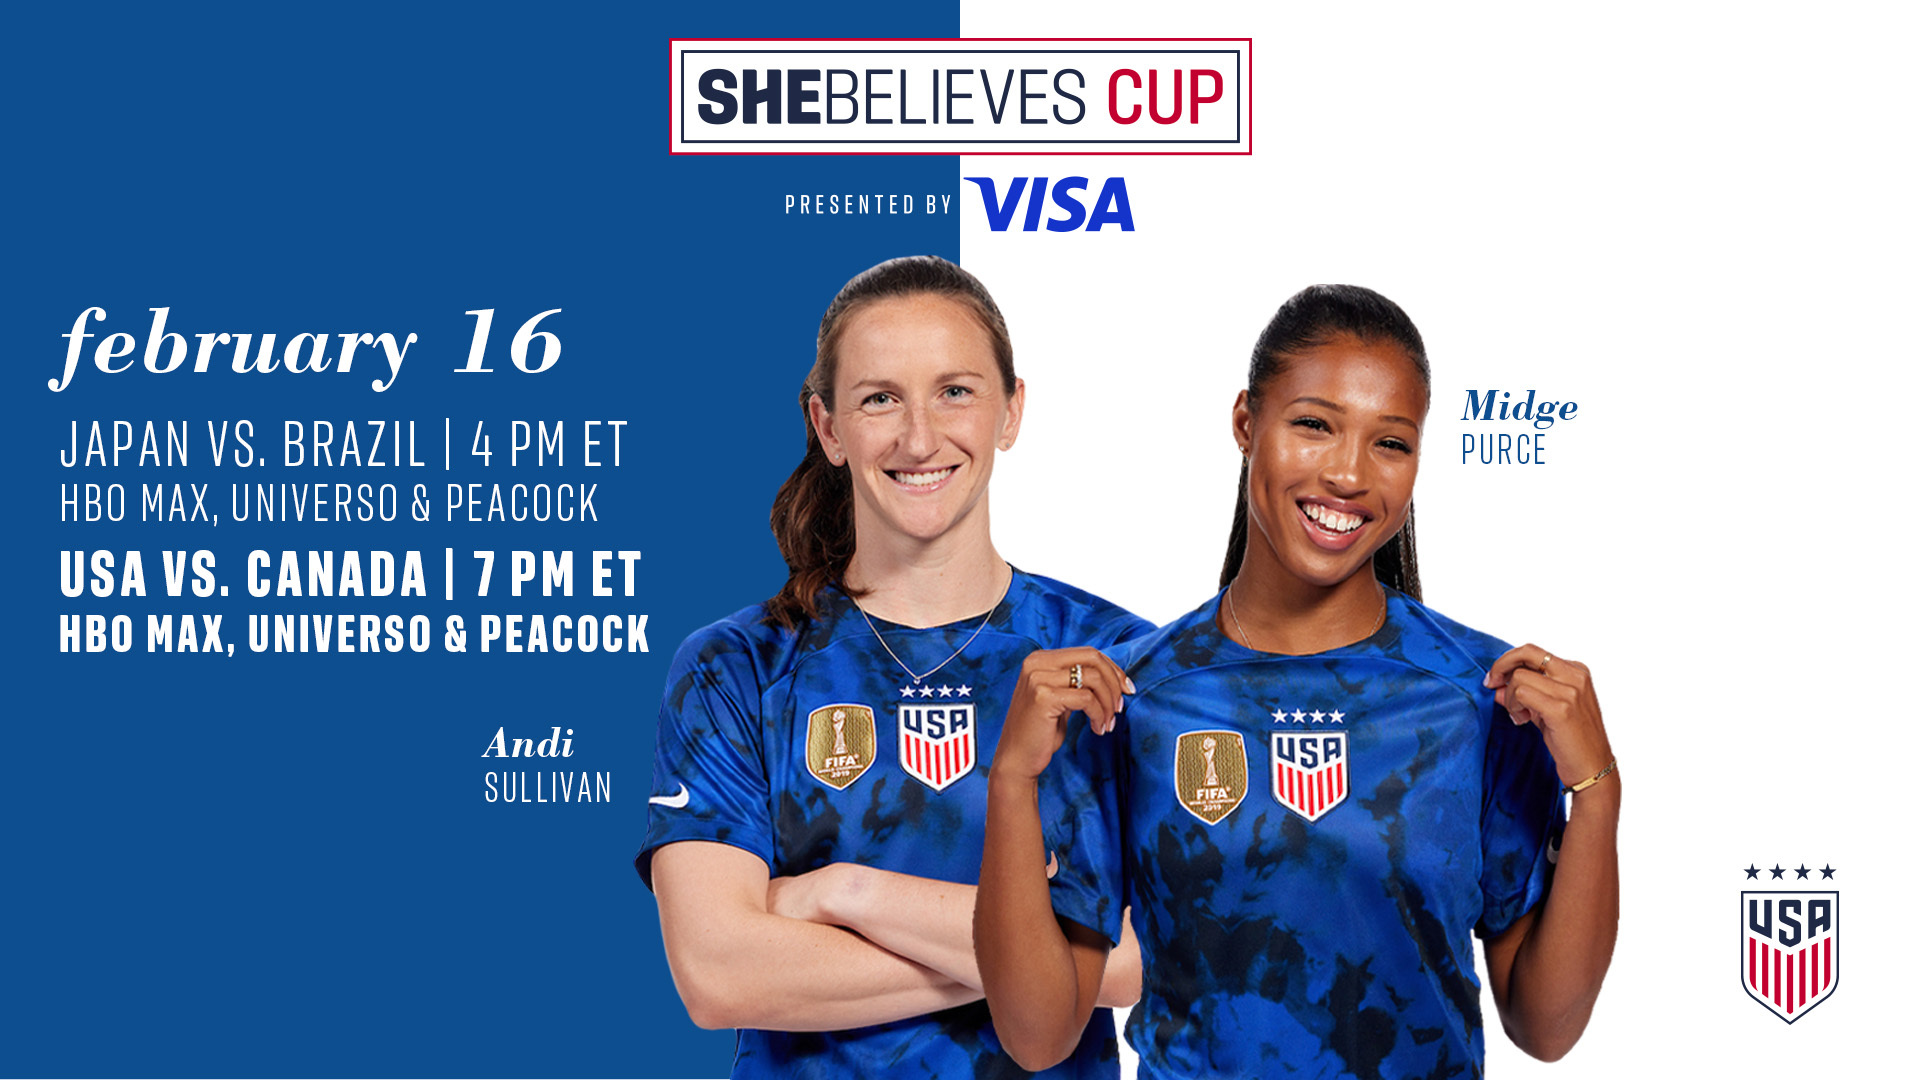   
																USWNT Takes On Canada To Open 2023 SheBelieves Cup, Presented By Visa 
															 